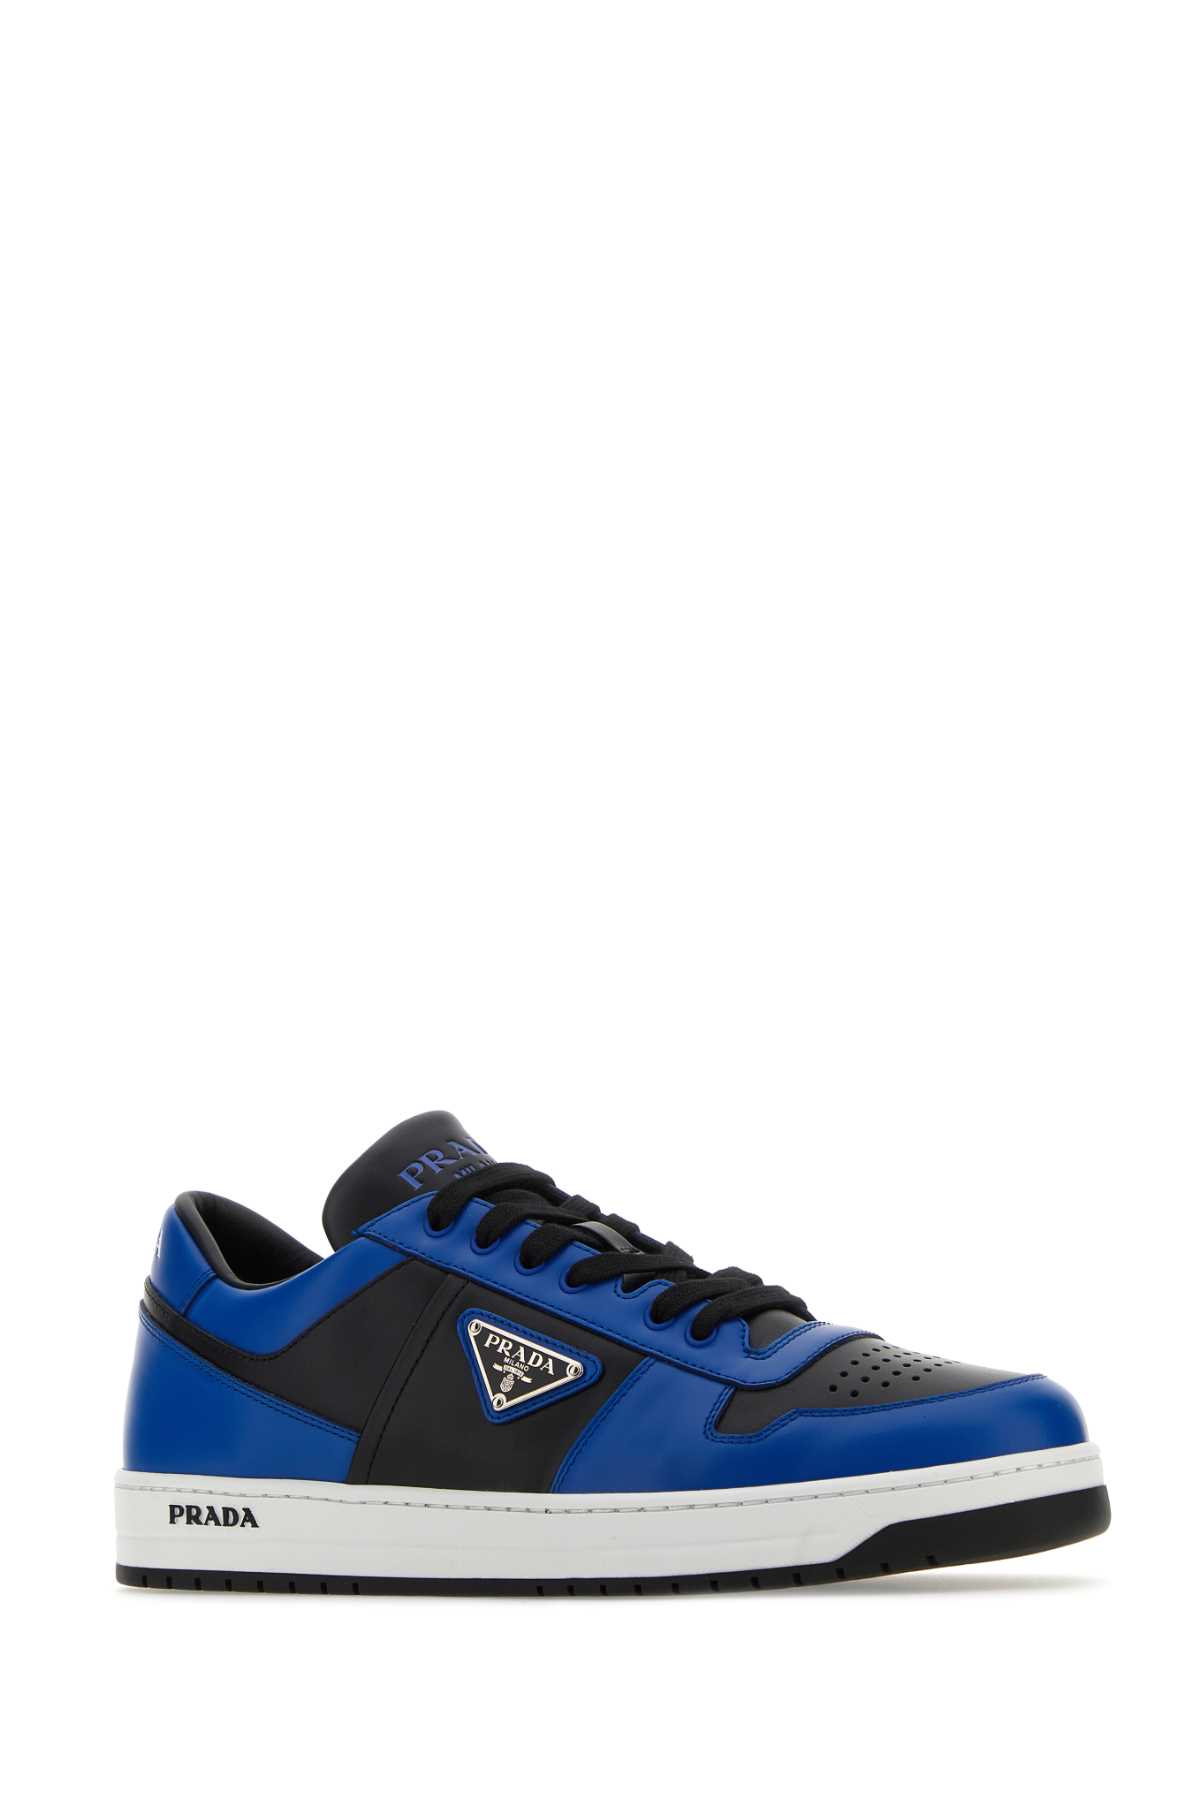 Shop Prada Two-tone Leather Downtown Sneakers In Nerocobalto